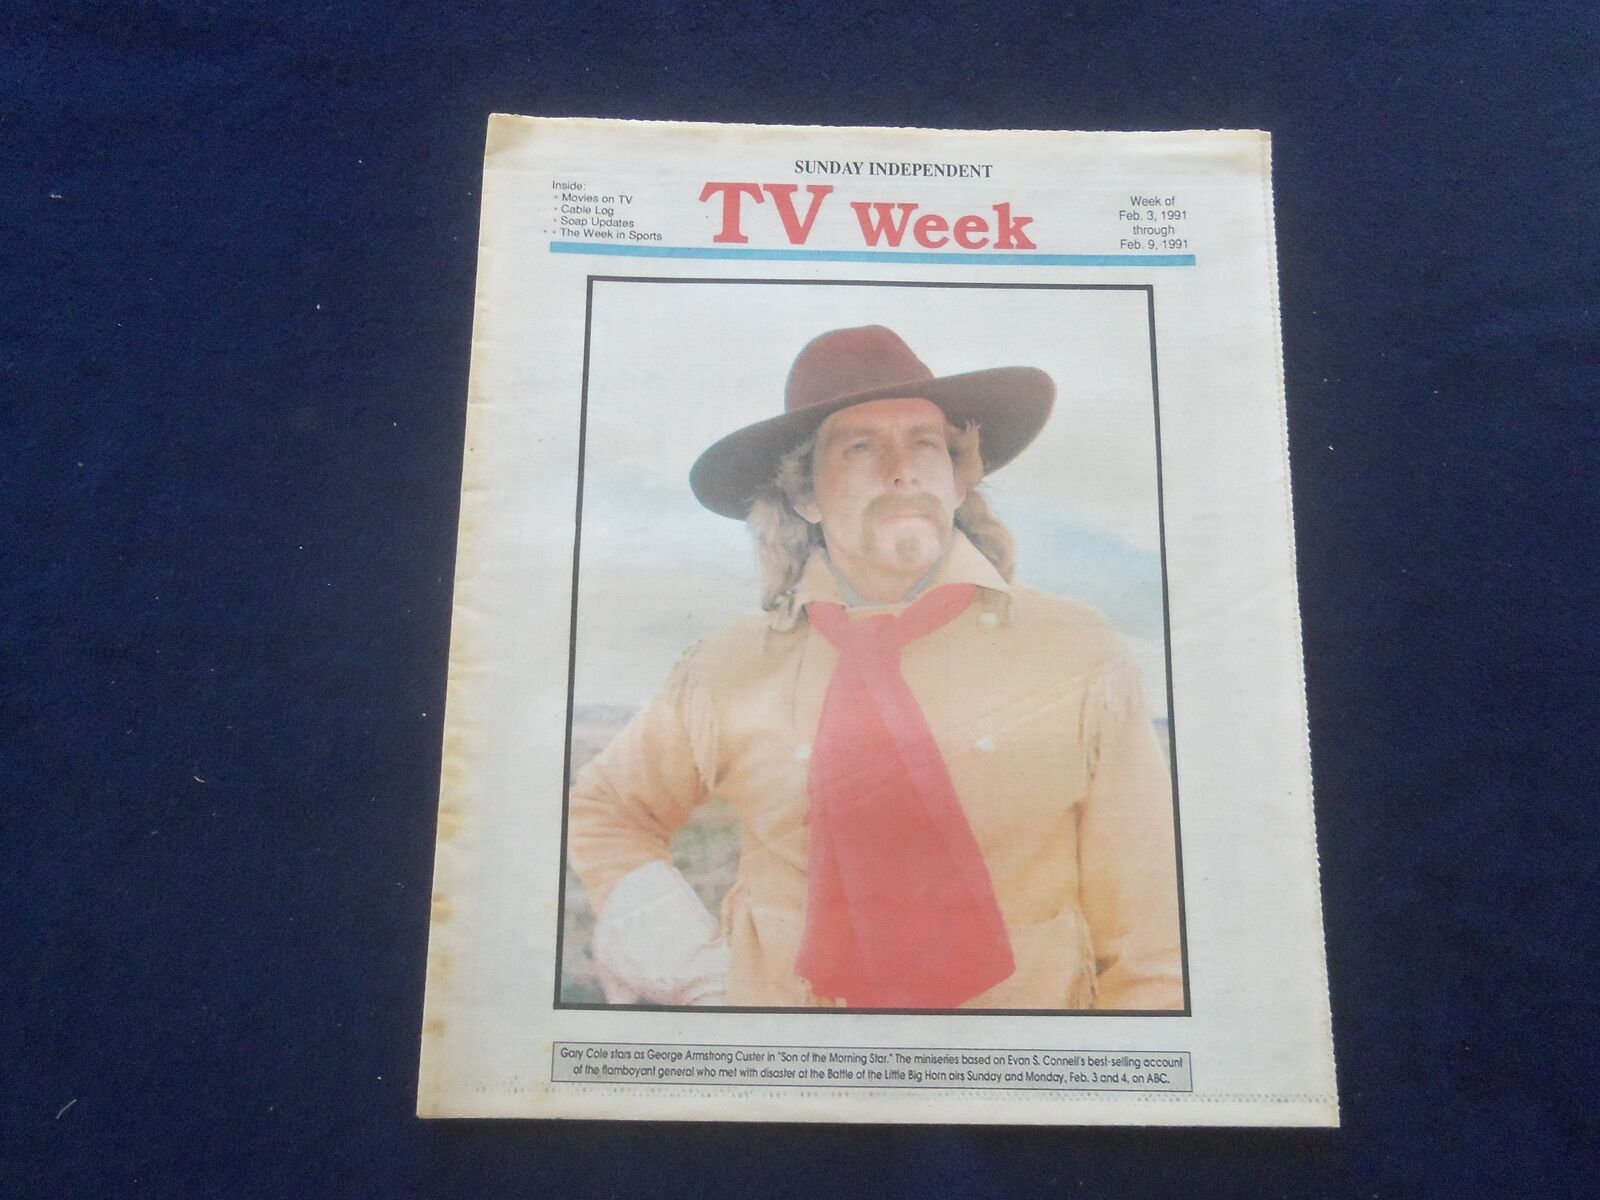 1991 FEBRUARY 3-9 SUNDAY INDEPENDENT TV WEEK SECTION - GARY COLE COVER - NP 6177